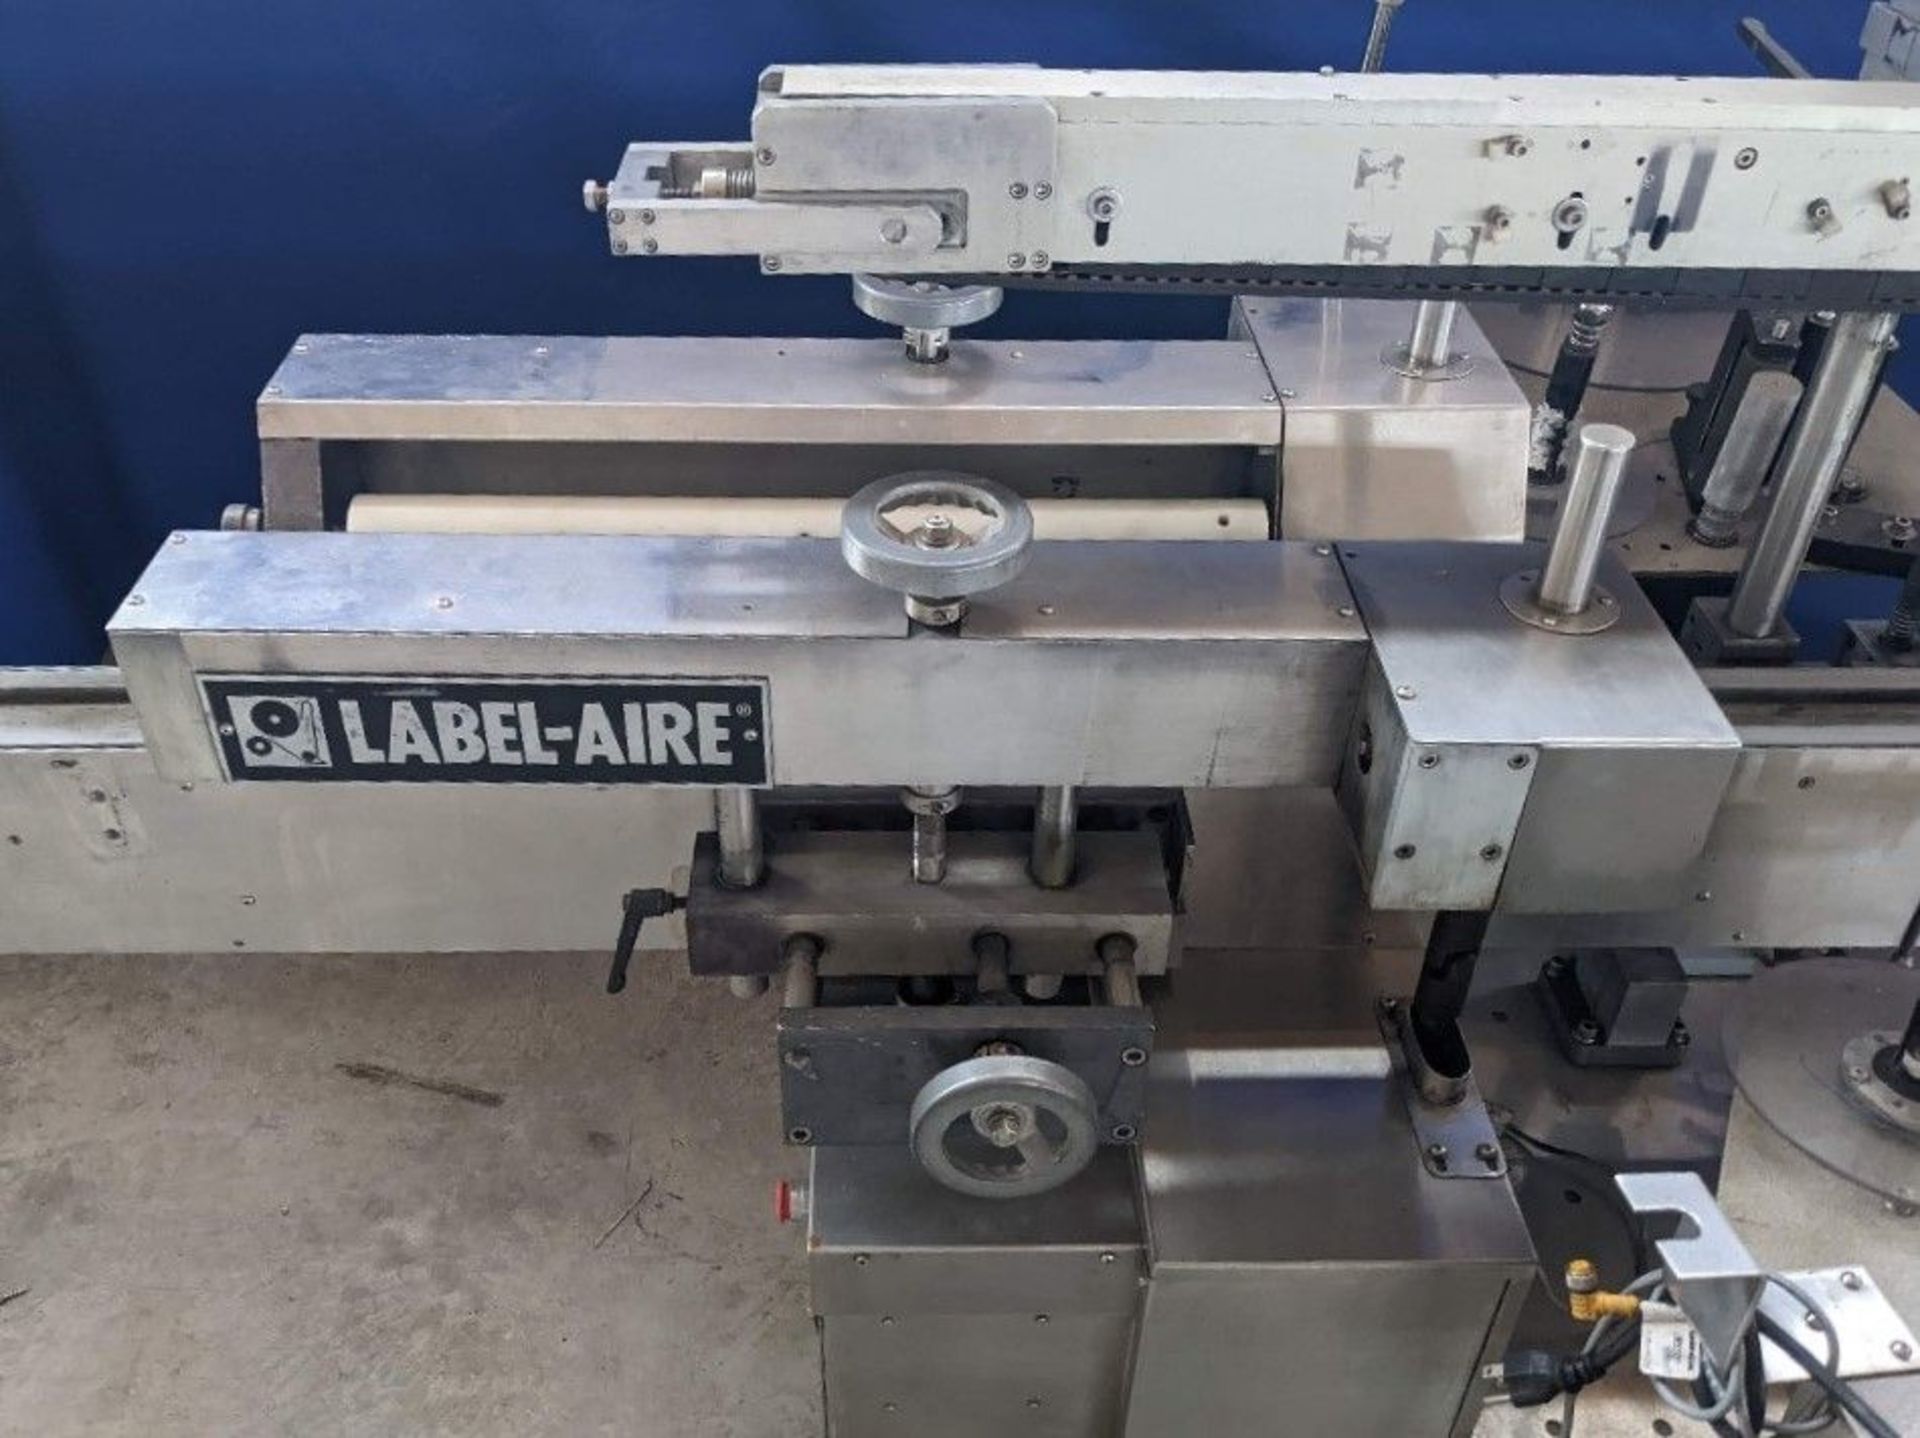 Qty (1) Labelaire Automatic Fronta and Back Pressure Sensitive Labeler - High speed stepper driven - Image 11 of 16